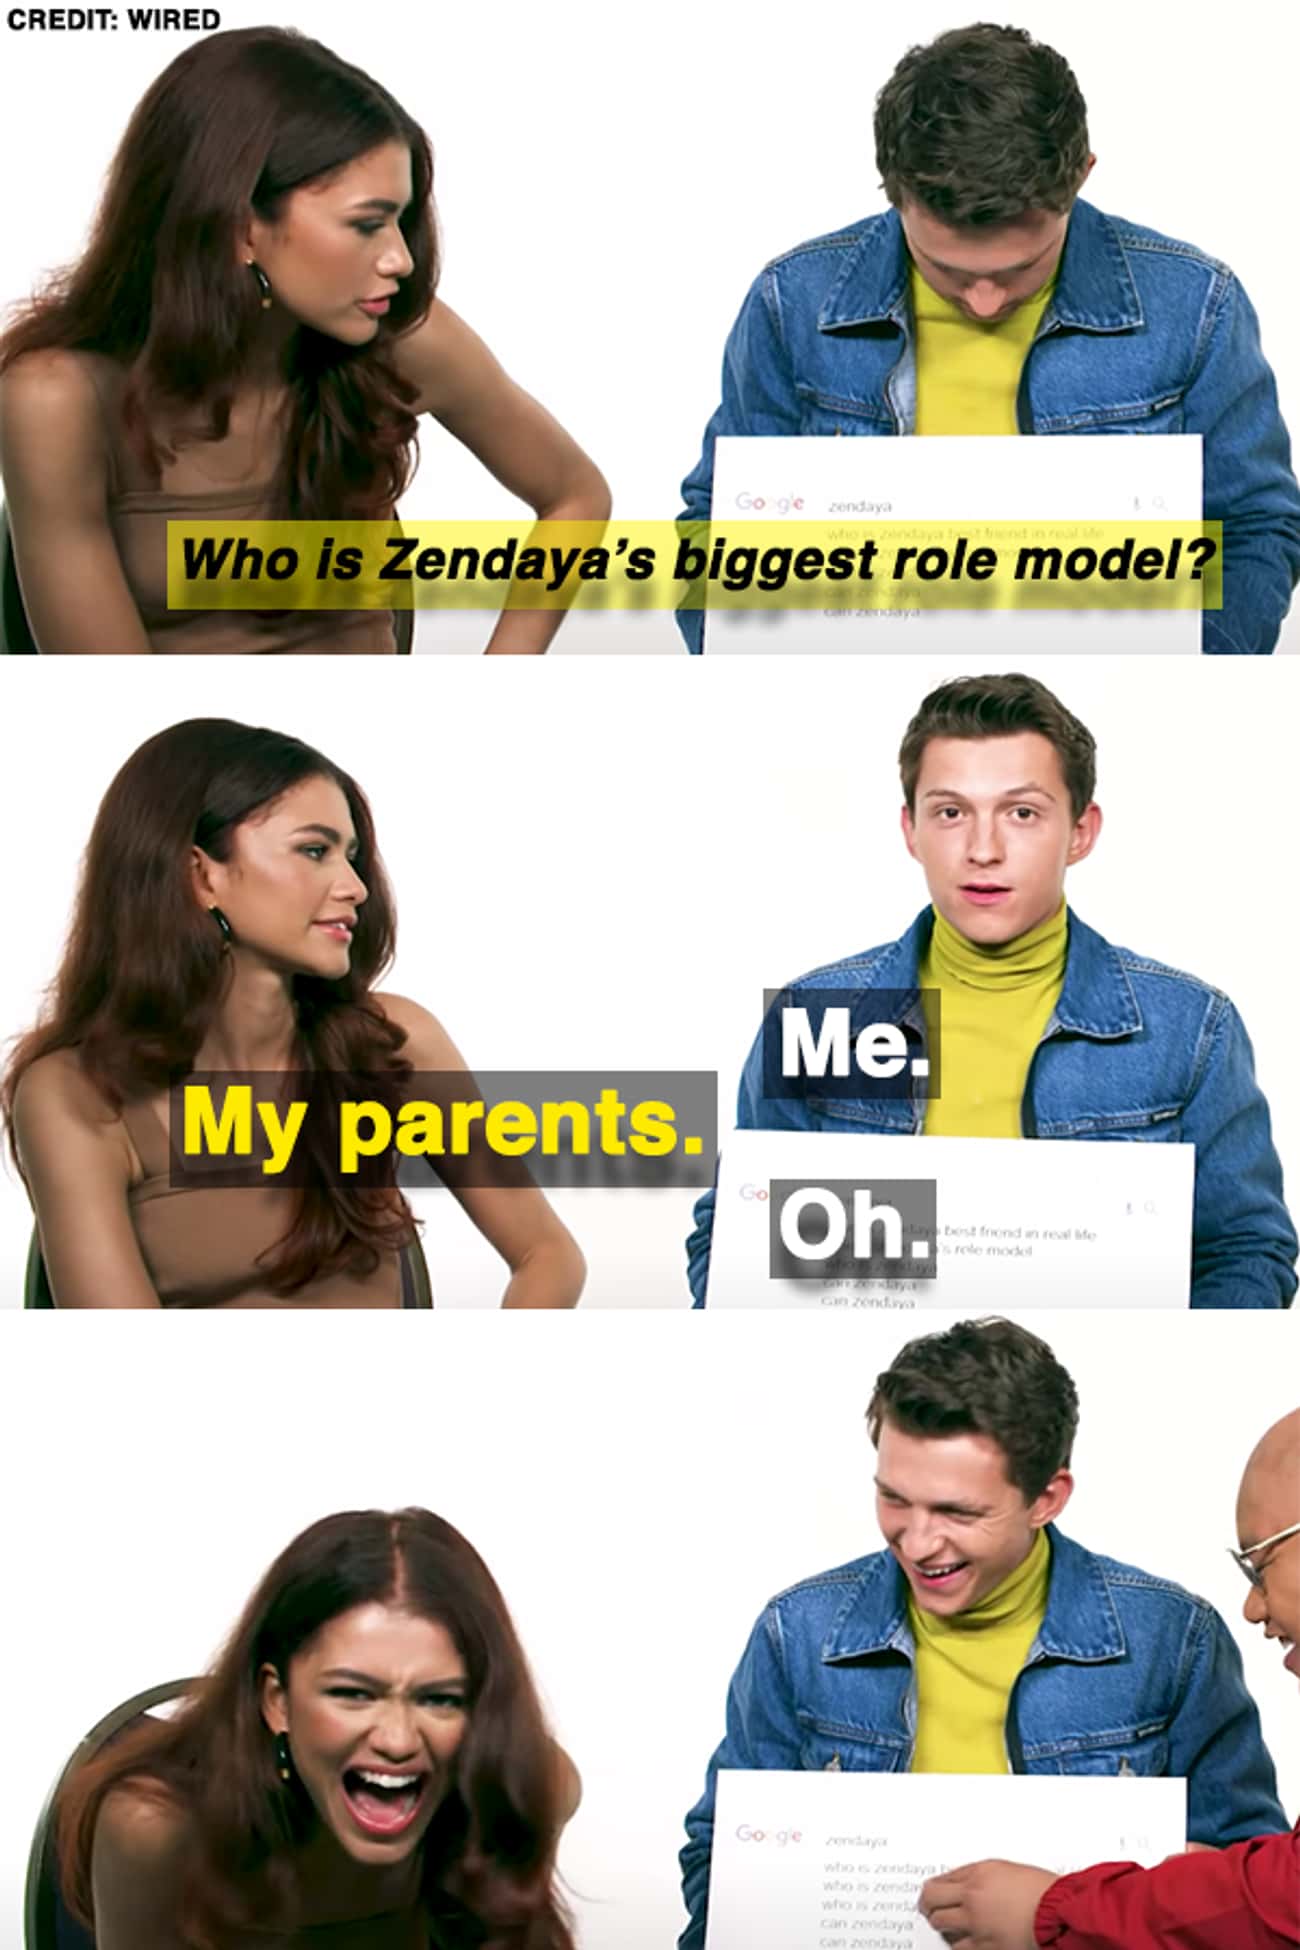 Zendaya Was Asked About Her Role Model